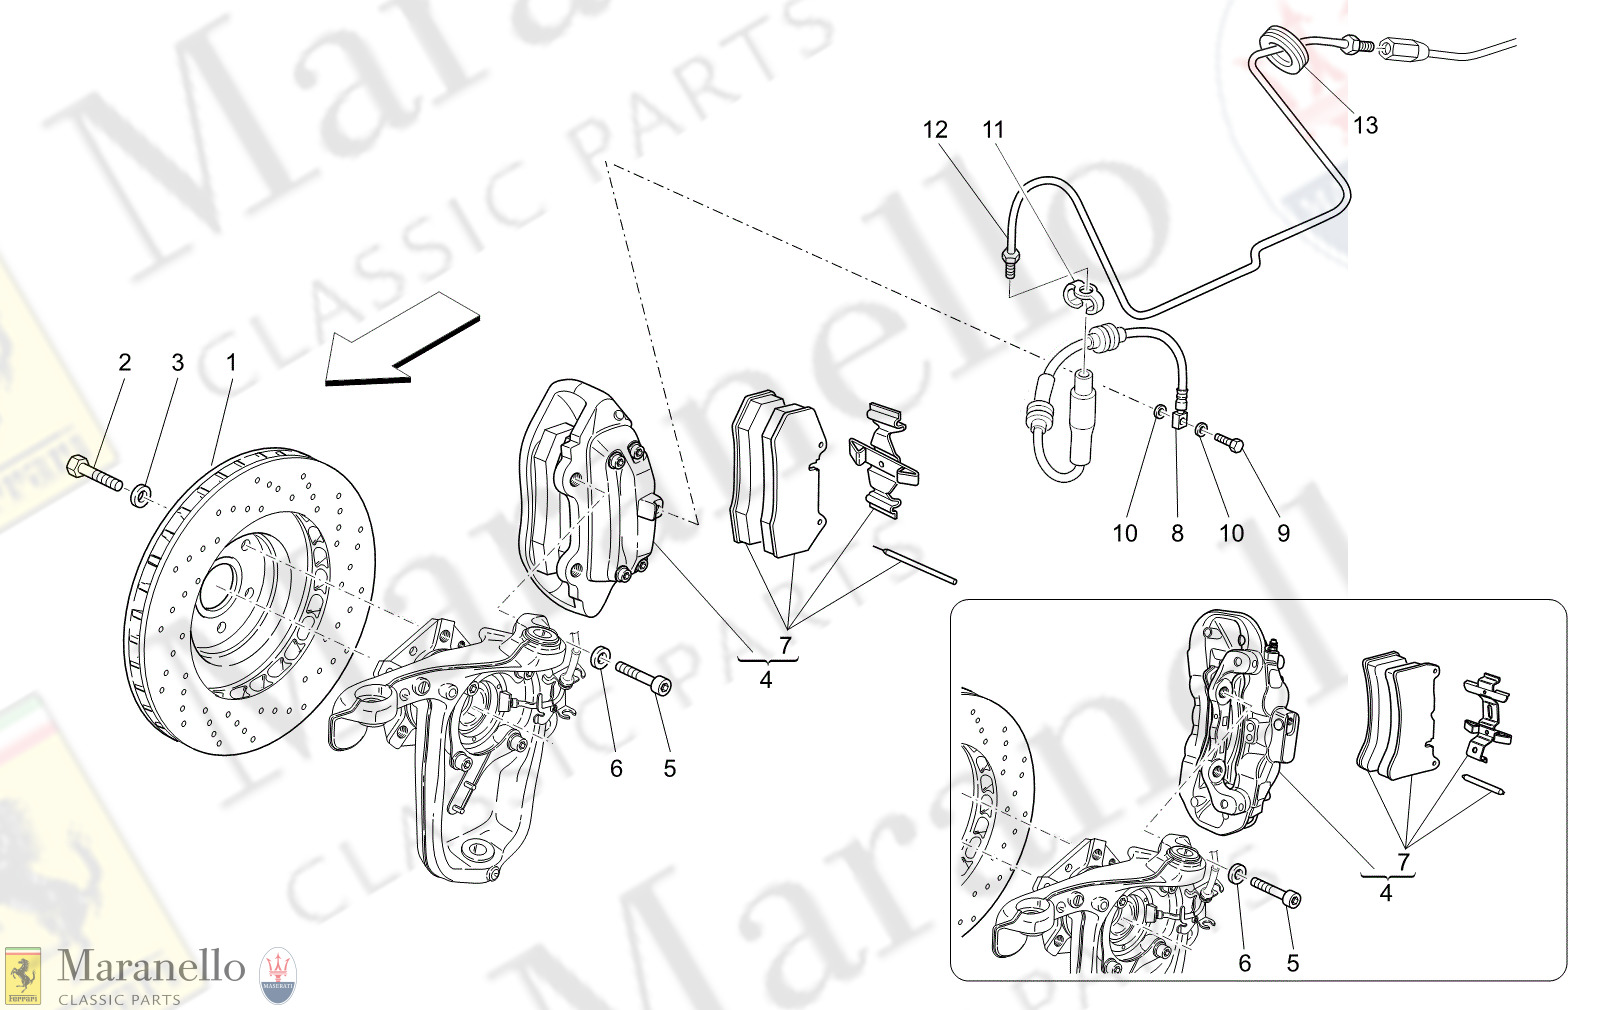 04.10 - 12 - 0410 - 12 Braking Devices On Front Wheels